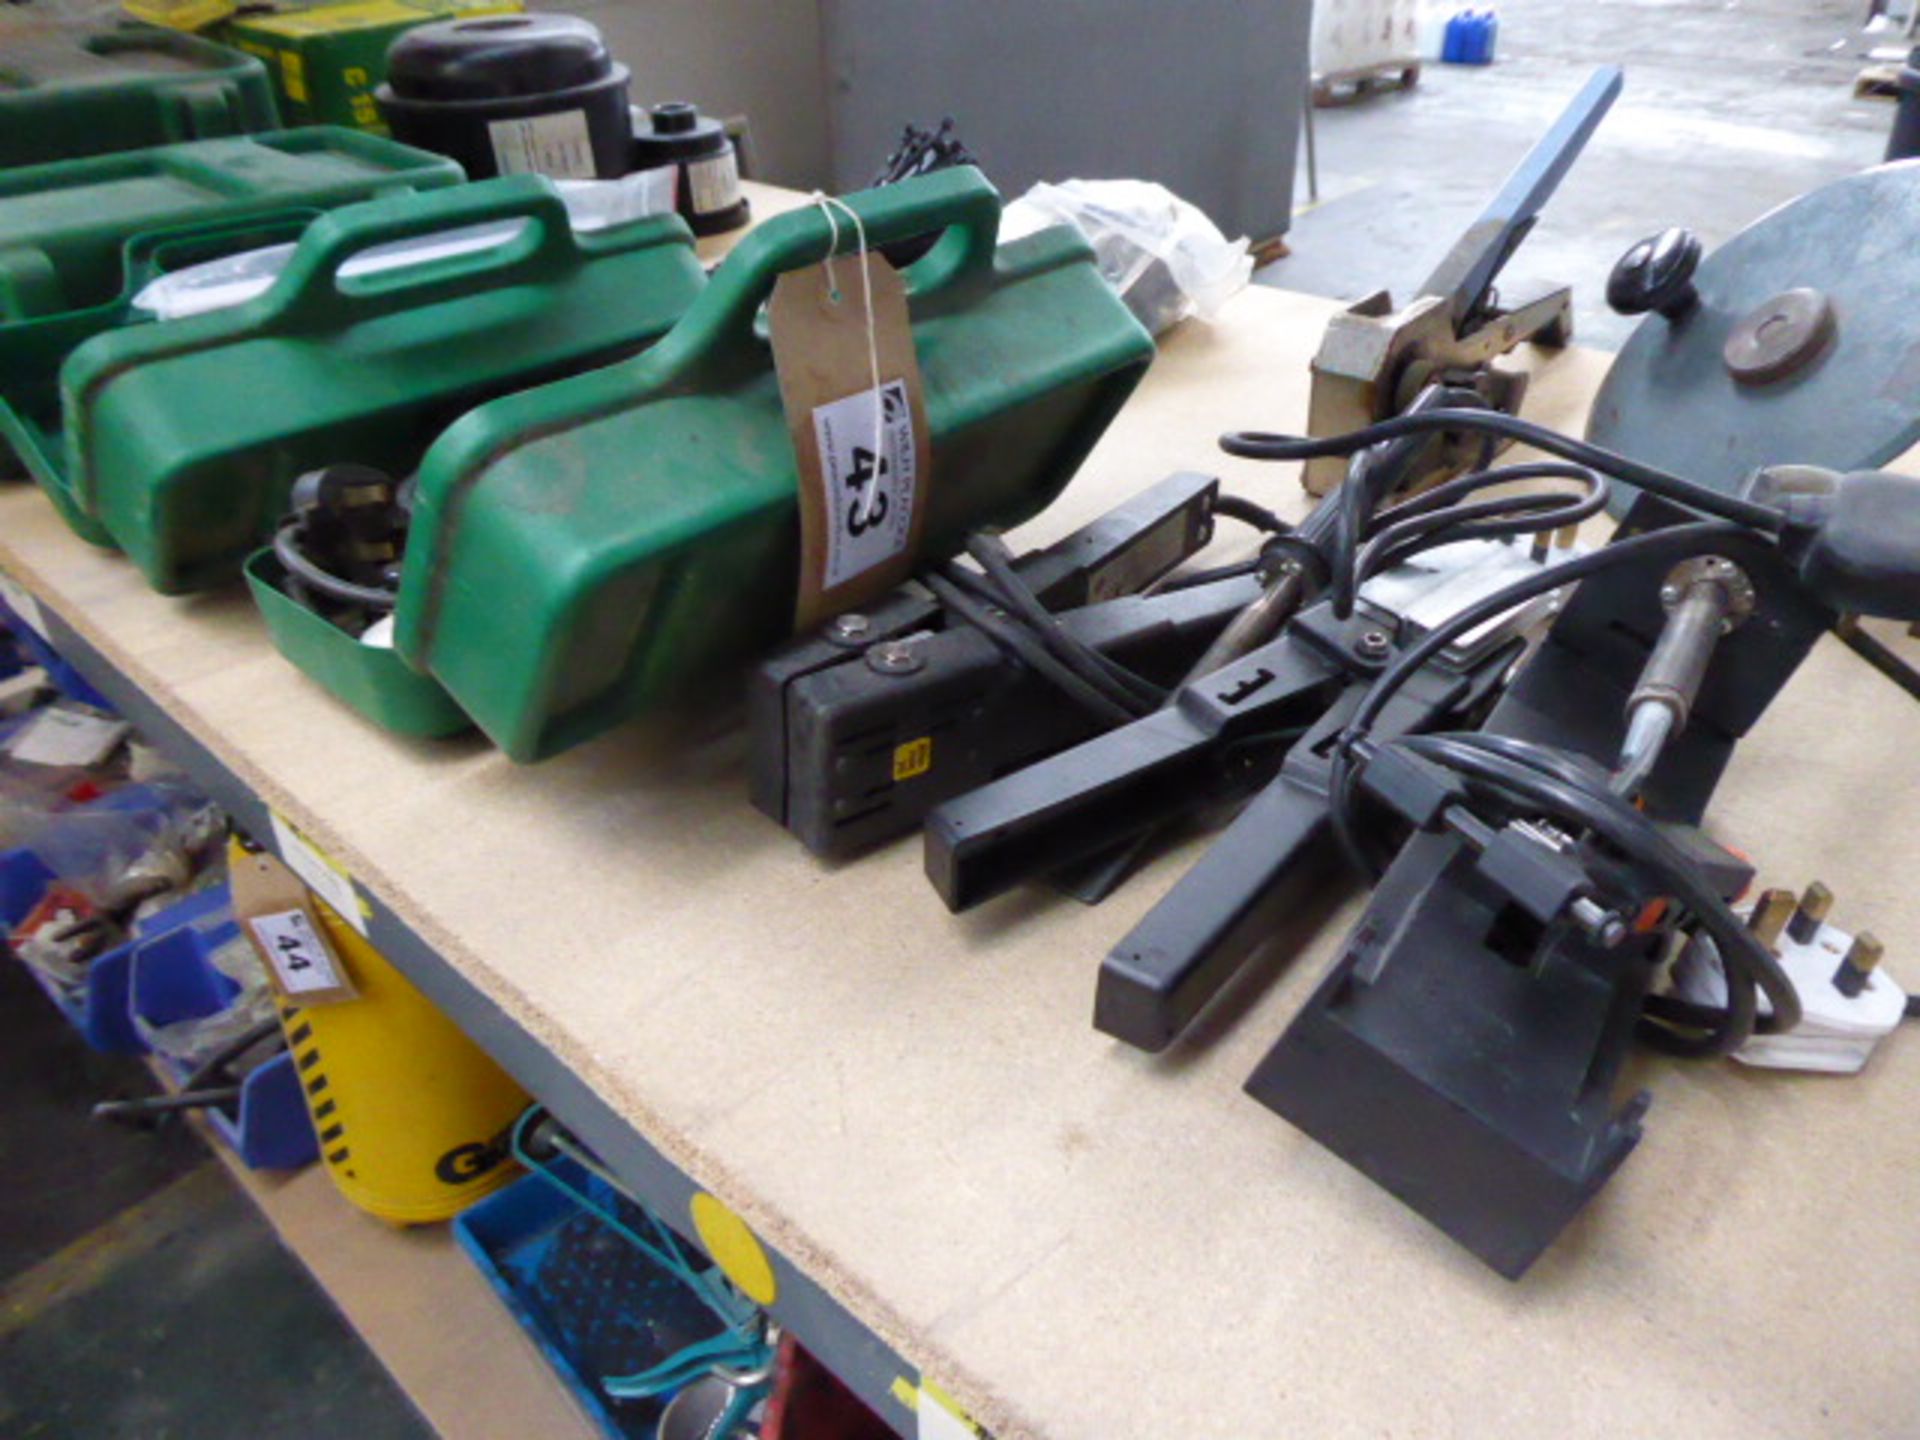 Range of hot pressing devices, machinery spares, filters etc (top shelf)